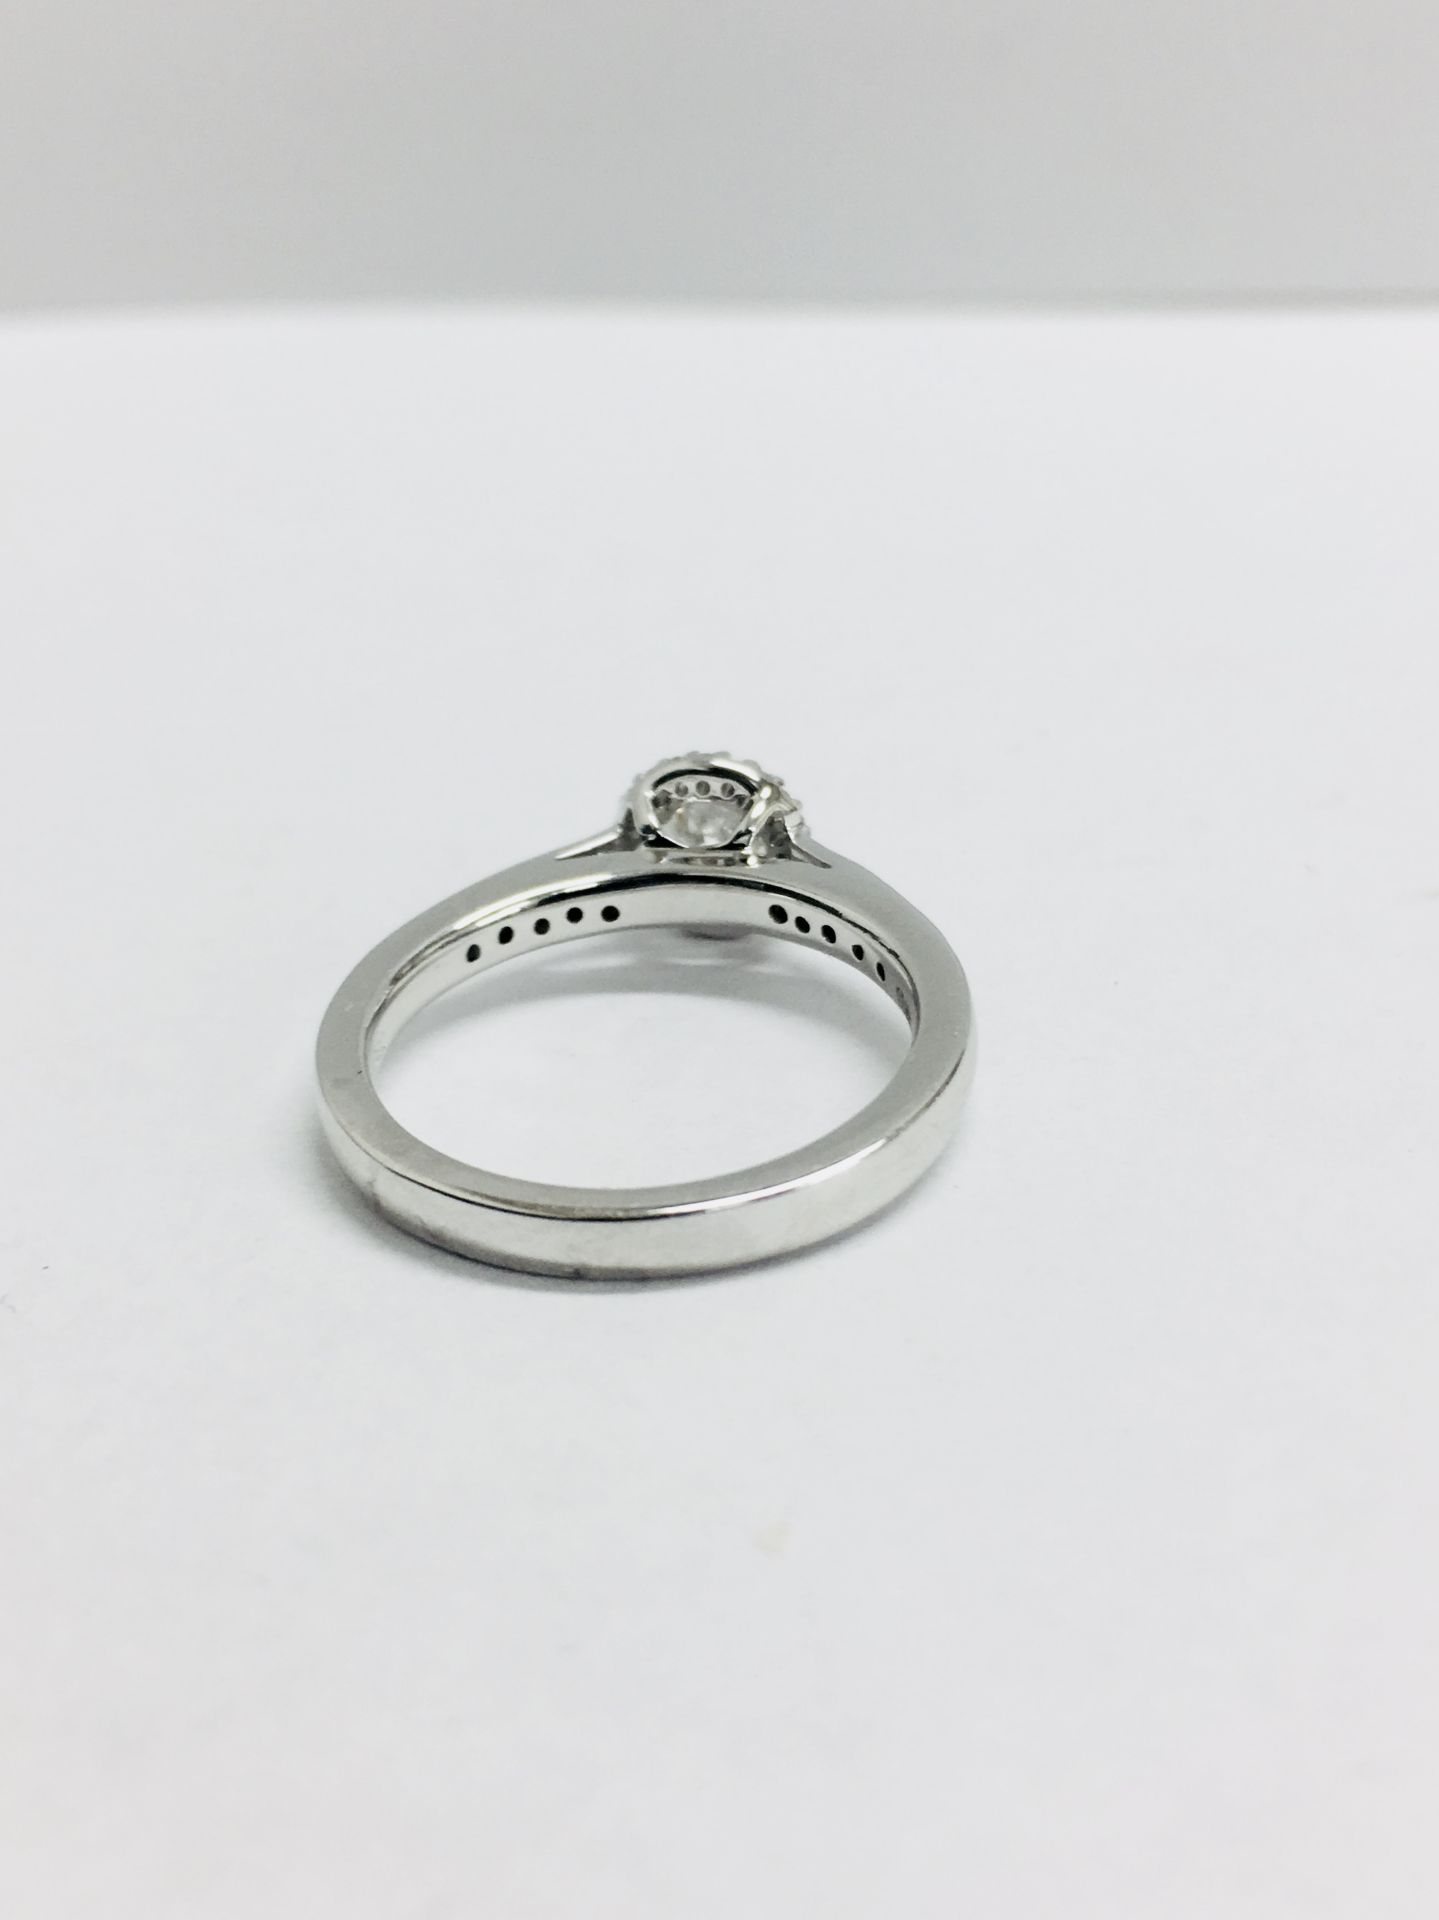 18ct white gold Halo style solitaire ring,0.30ct natural diamond,0.28ct h Colour si diamonds - Image 3 of 6